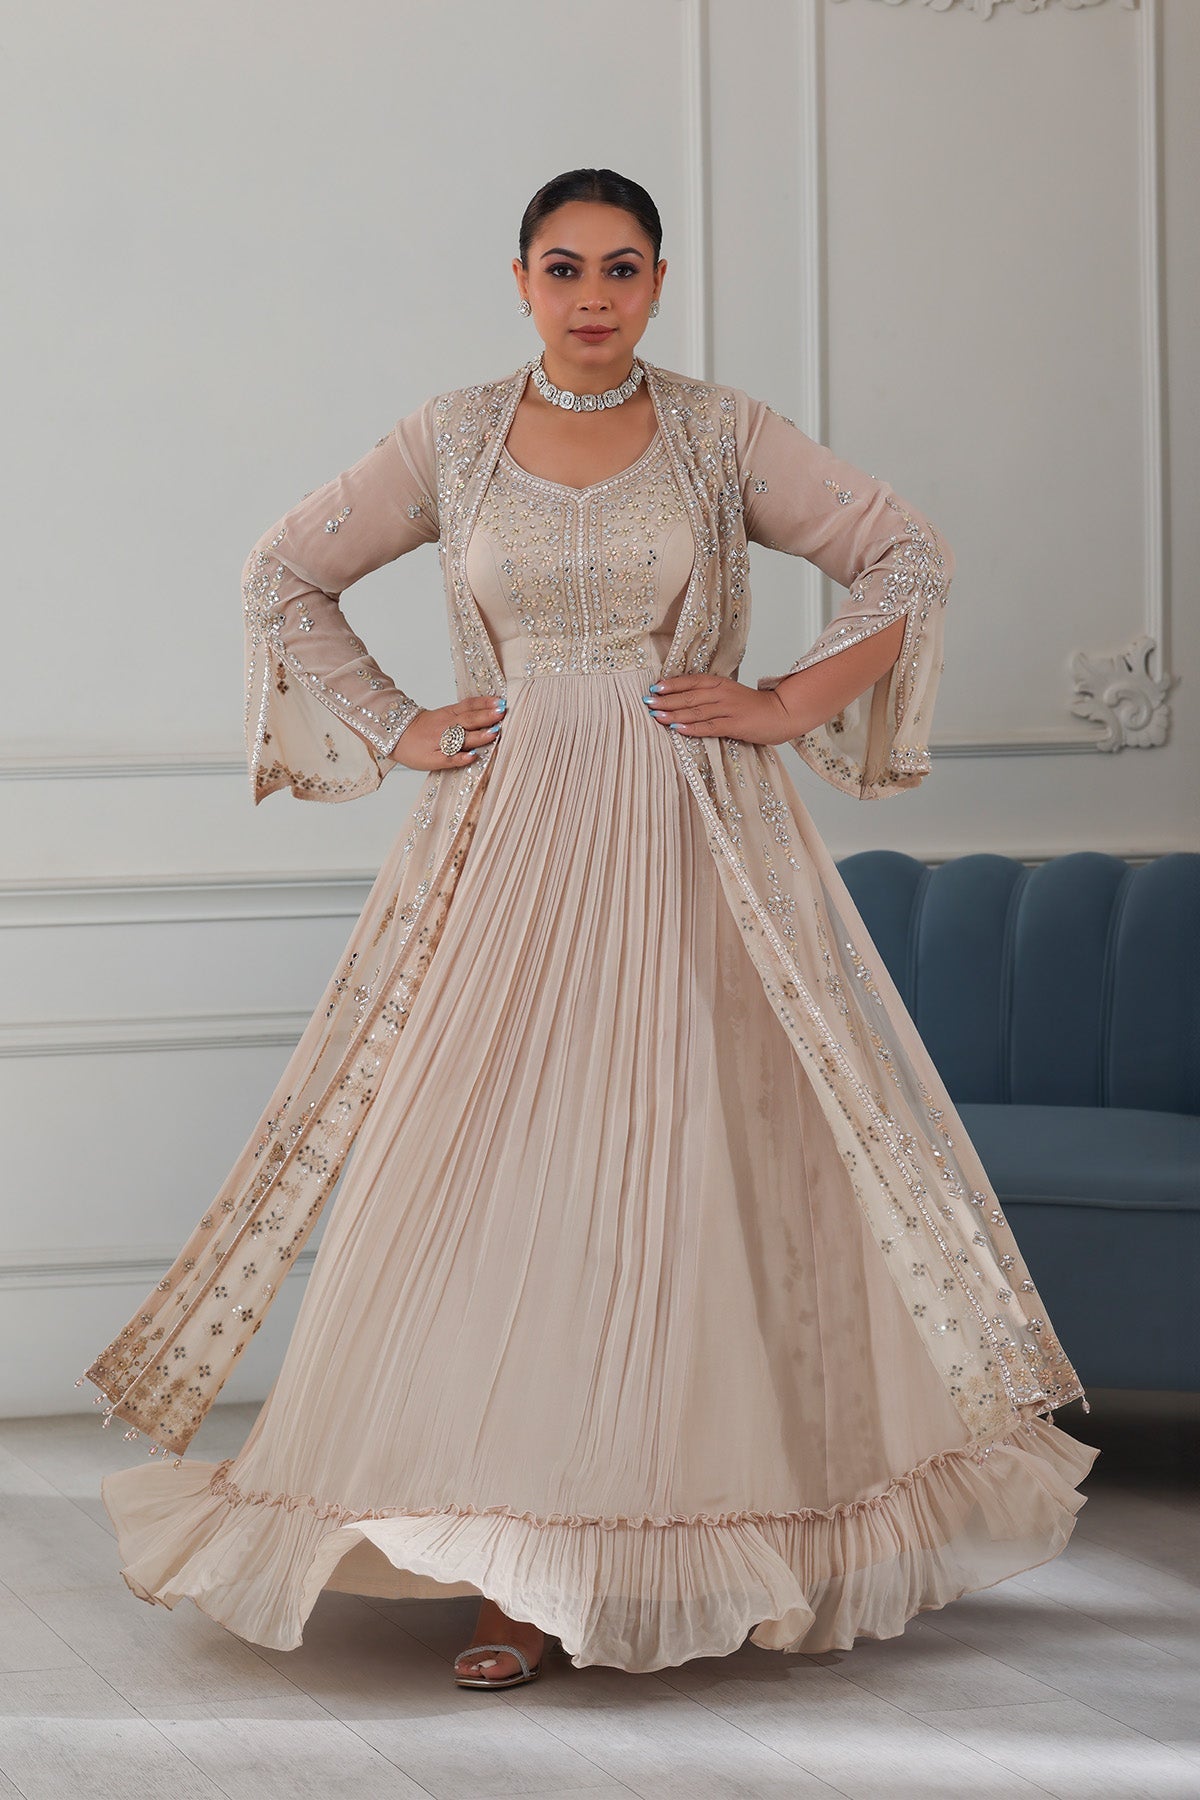 The New- Age Anarkali Suit